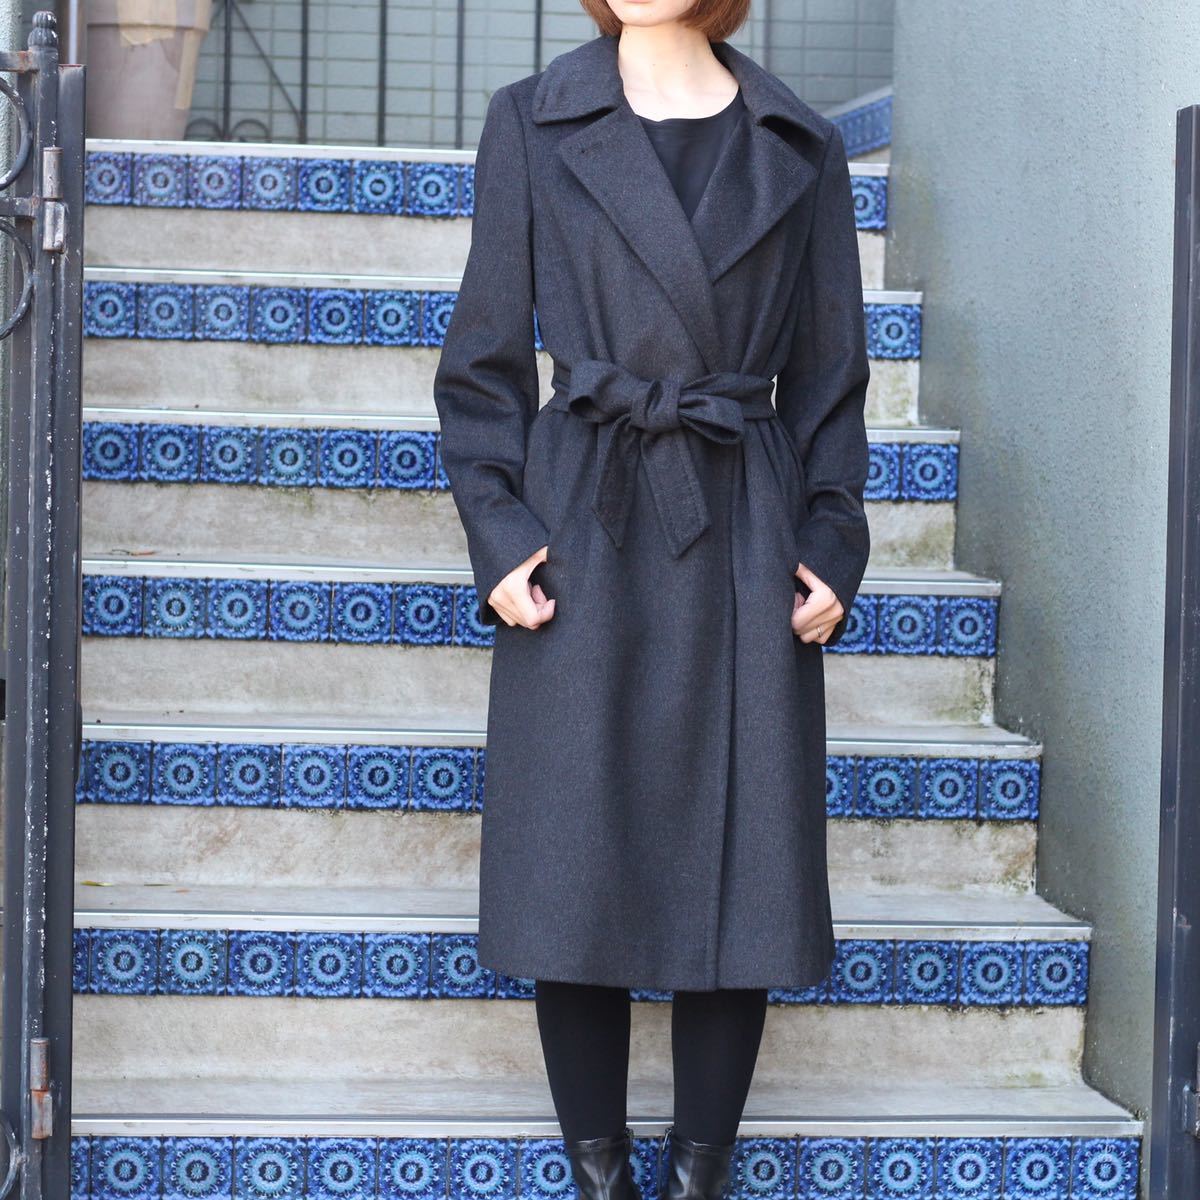 Aquascutum CASHMERE BREND WOOL BELTED COAT MADE IN JAPAN/アクアスキュータムカシミヤ混ウールベルテッドコート